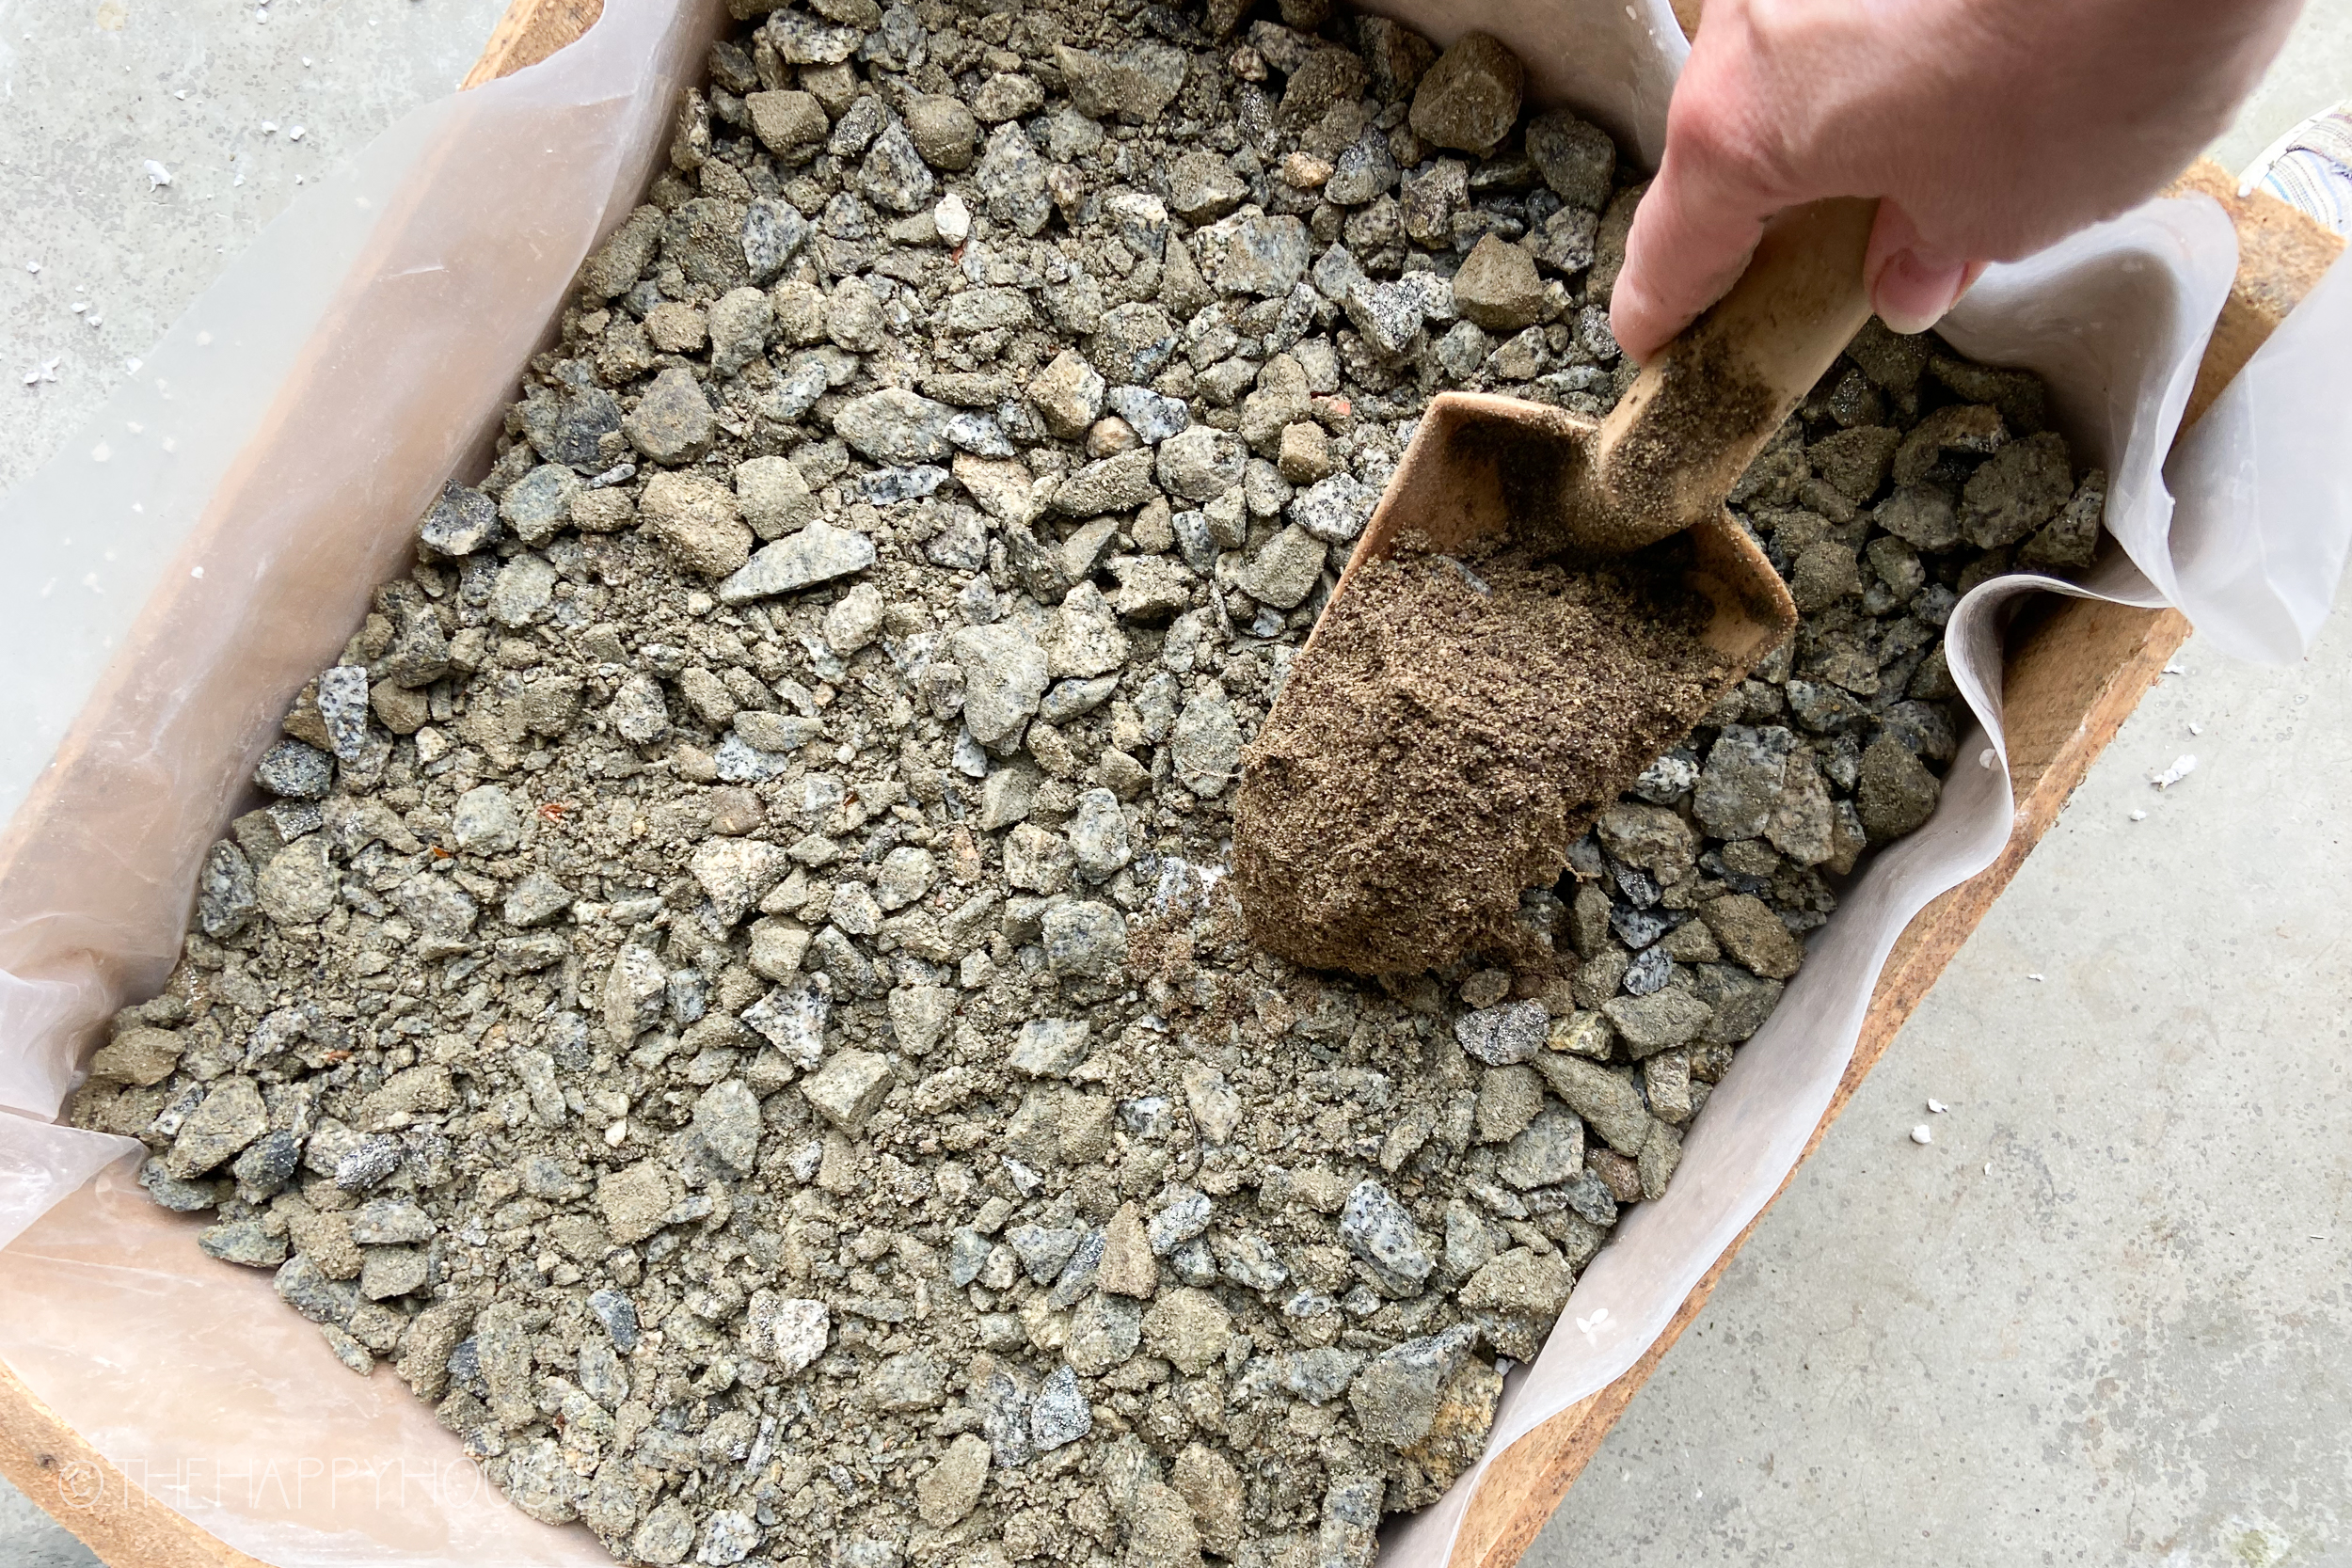 Scooping soil on top of the rocks in the wooden box.